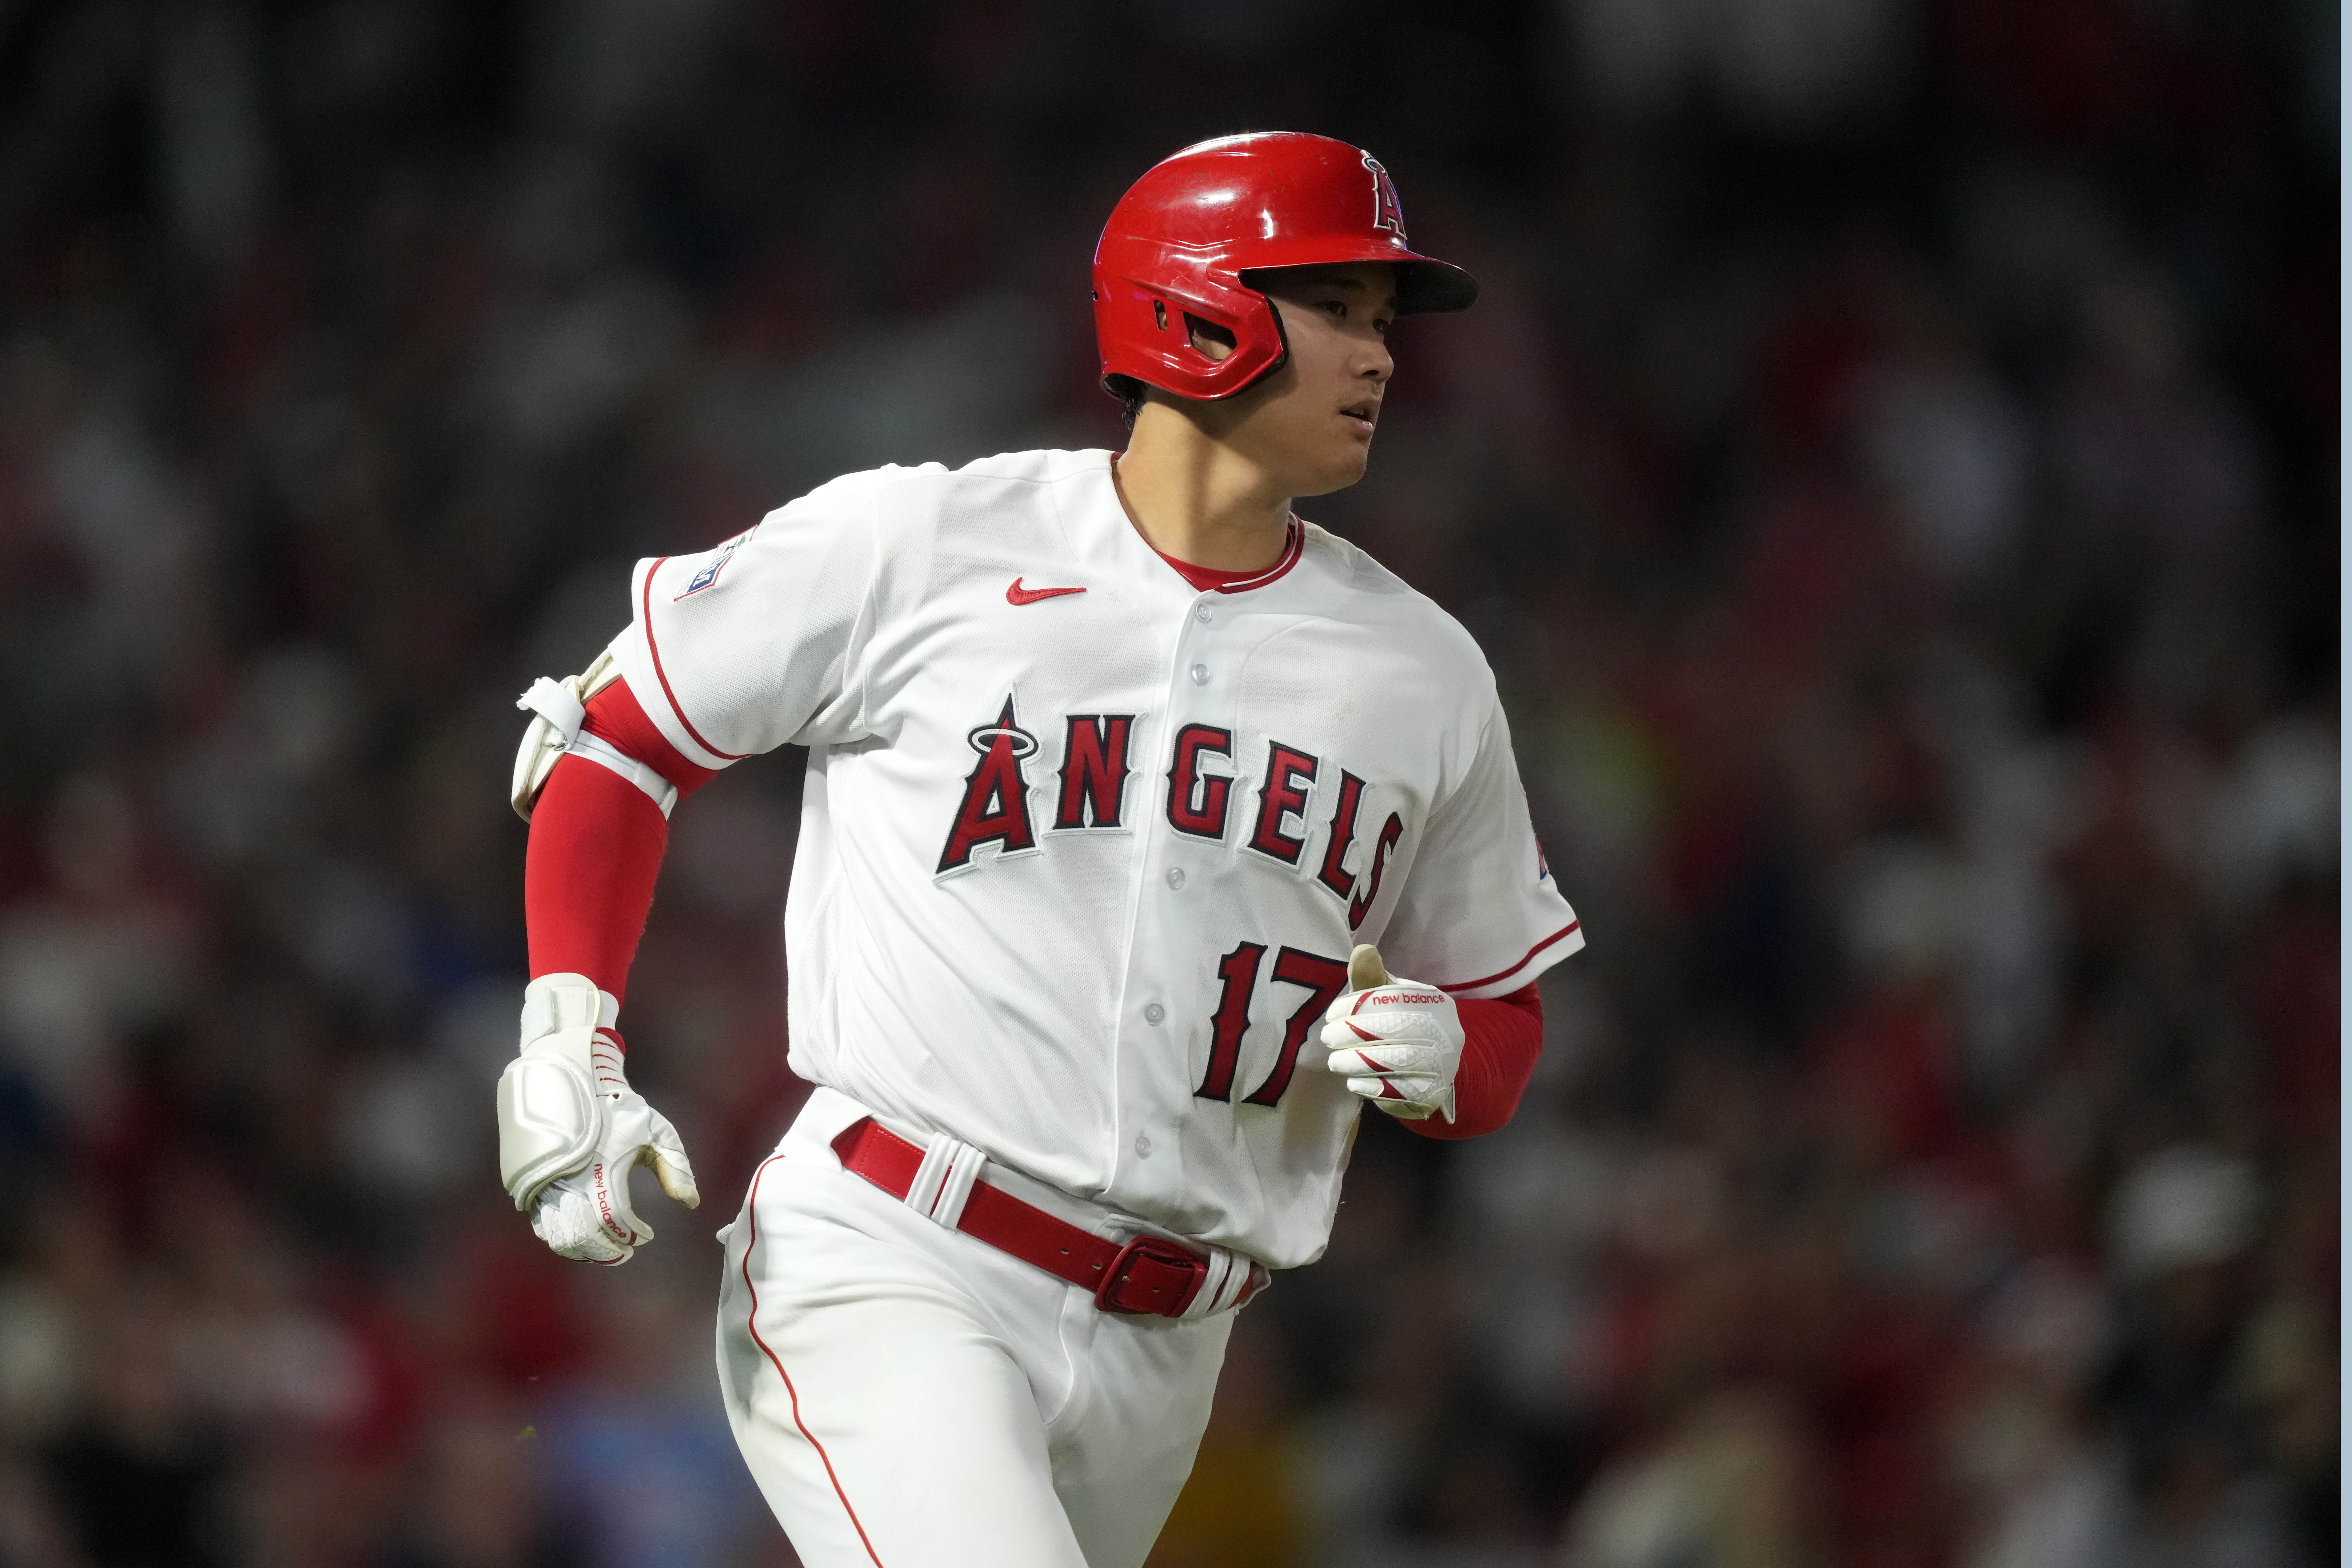 Chicago White Sox — Angels for Higher